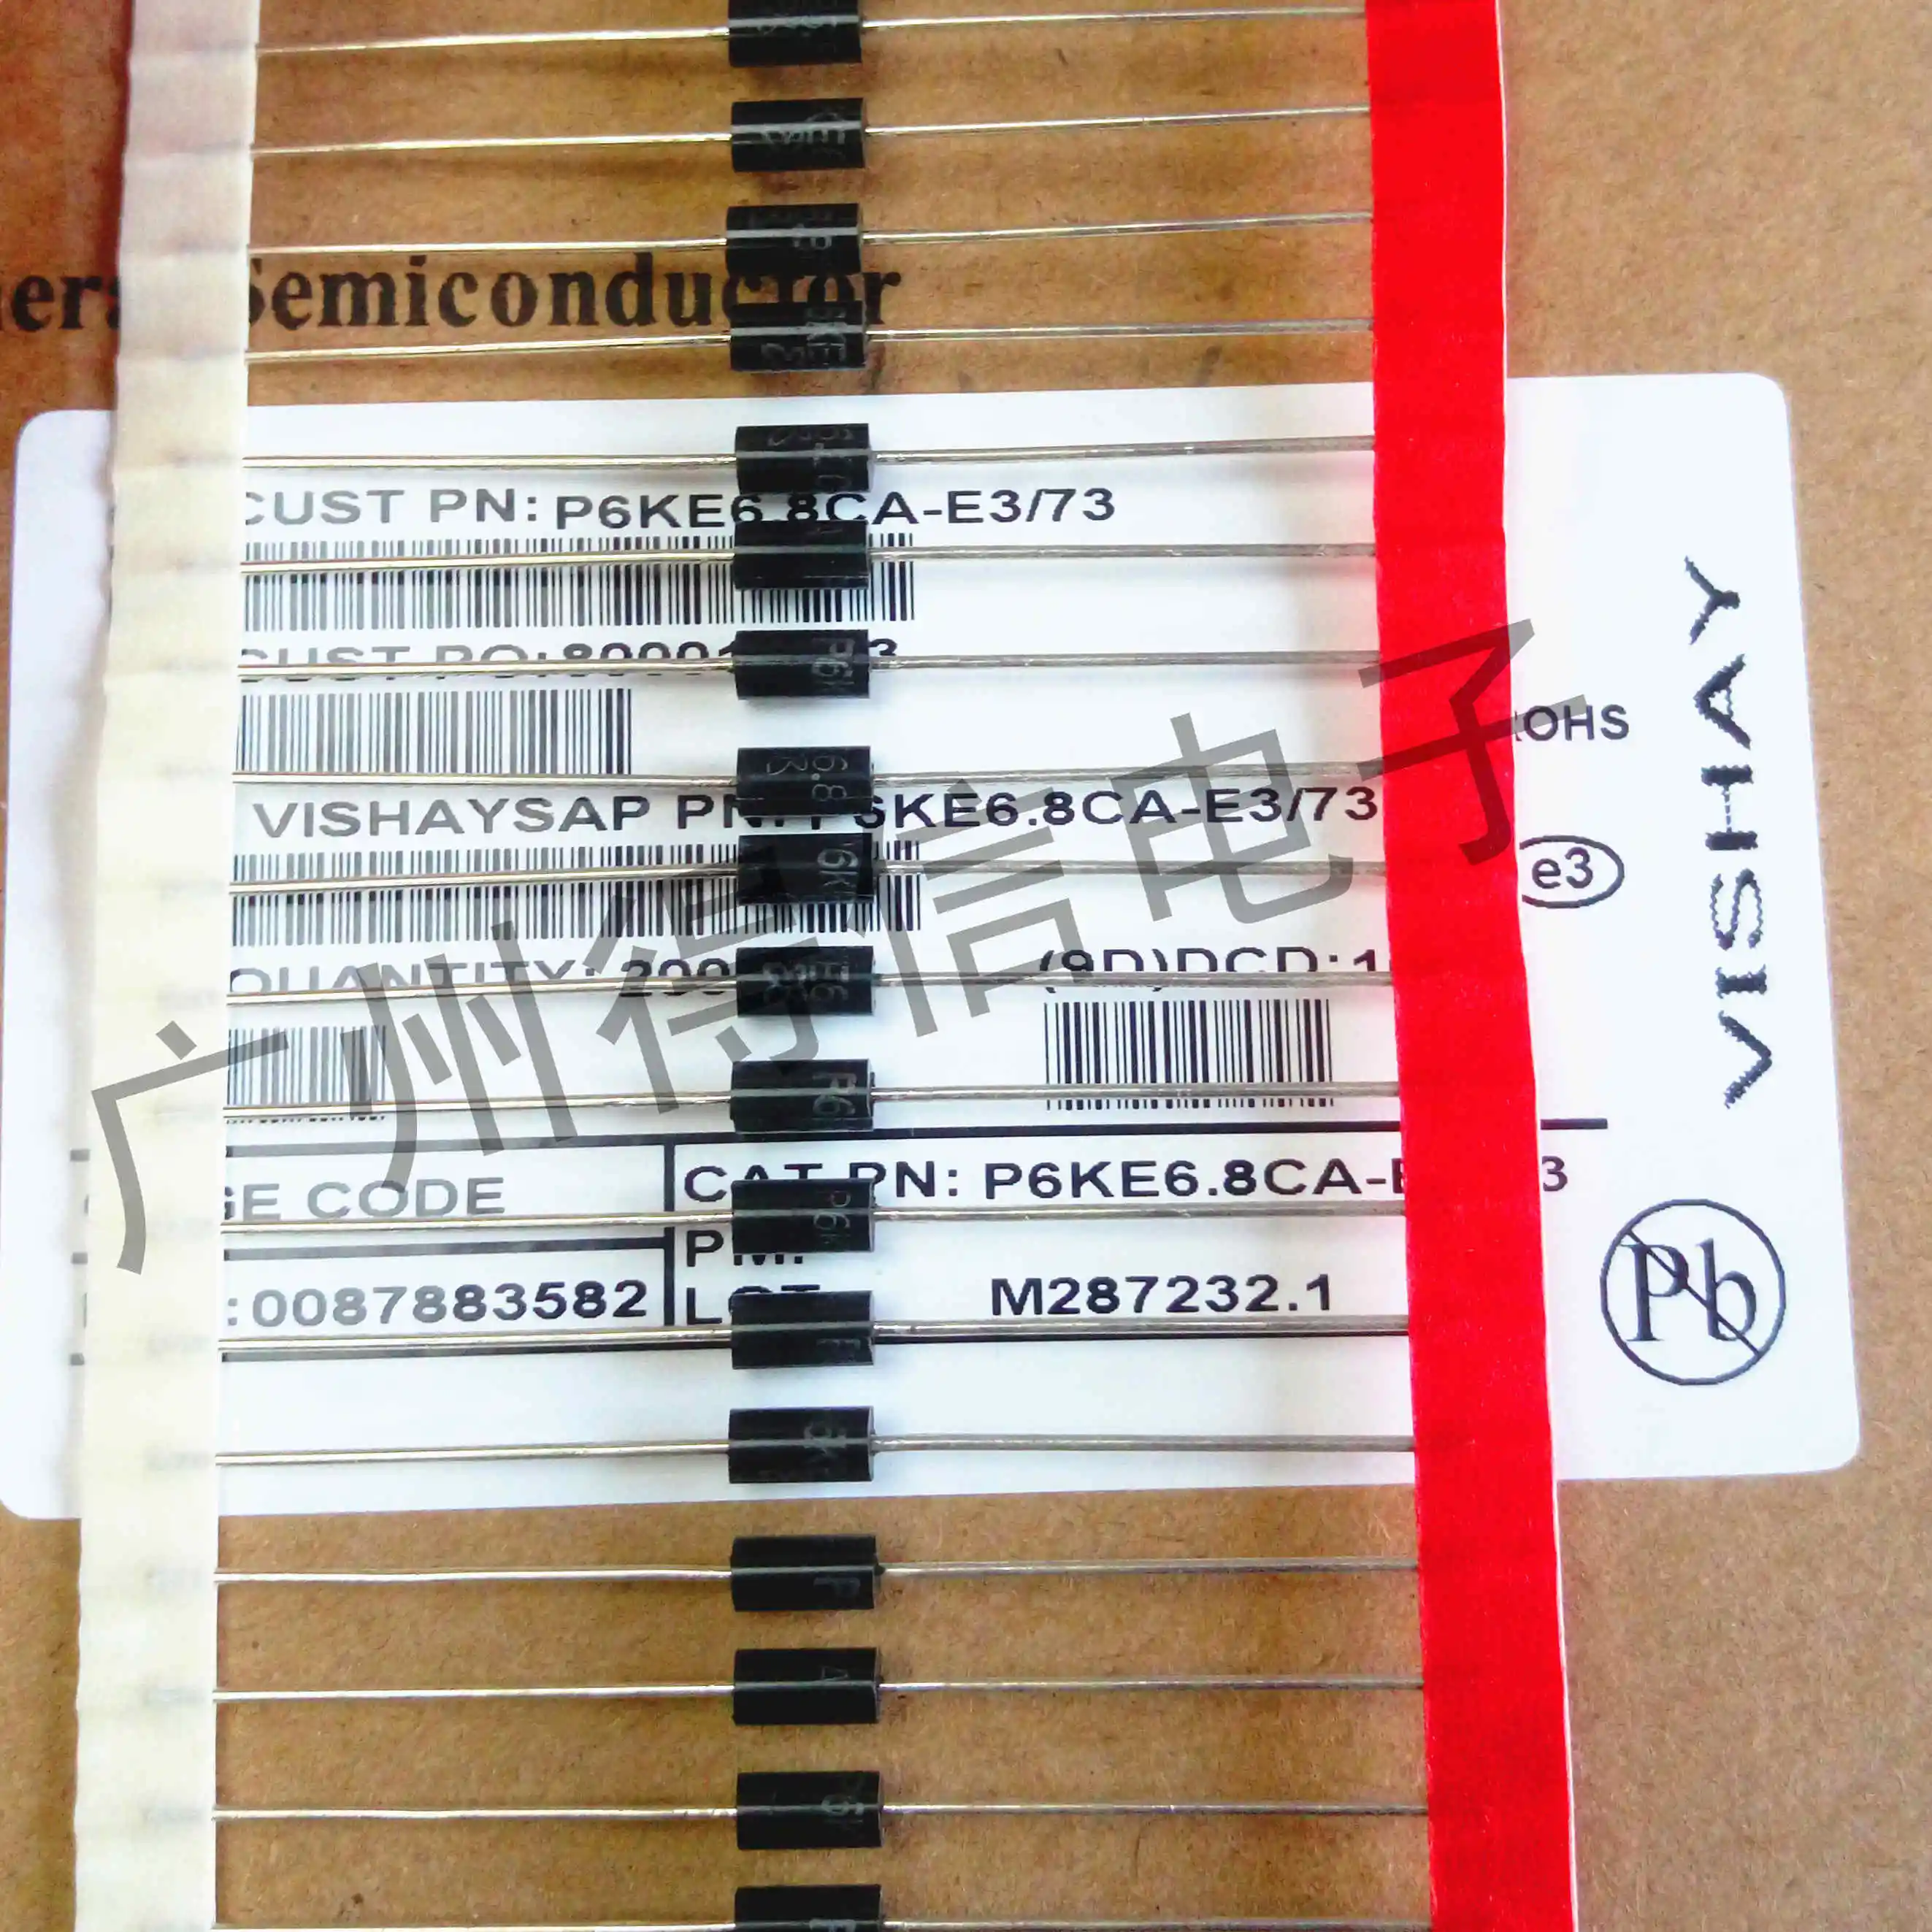 100pcs/lot New VISHAY P6KE DO-15 A unidirectional diode TVS tube plug-in taping transient suppression diode free shipping 100pcs smc ss510 sr5100 sb5100 smd schottky diode 5a 100v do 214ab 100% brand new spot free shipping electronics